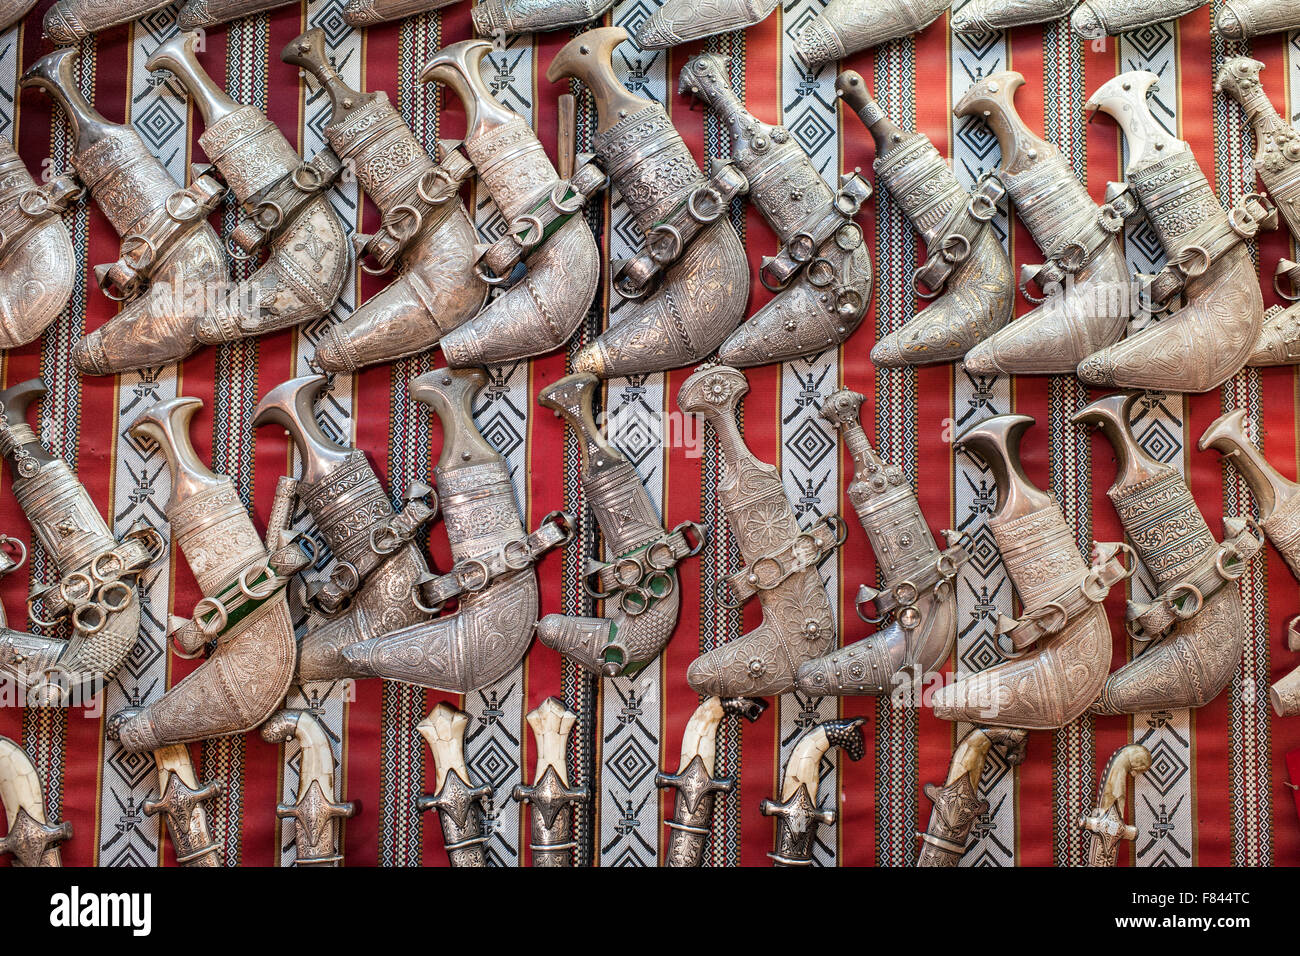 Traditional Omani Khanjar daggers for sale in the Mutrah souk in Muscat, the capital of the Sultanate of Oman. Stock Photo